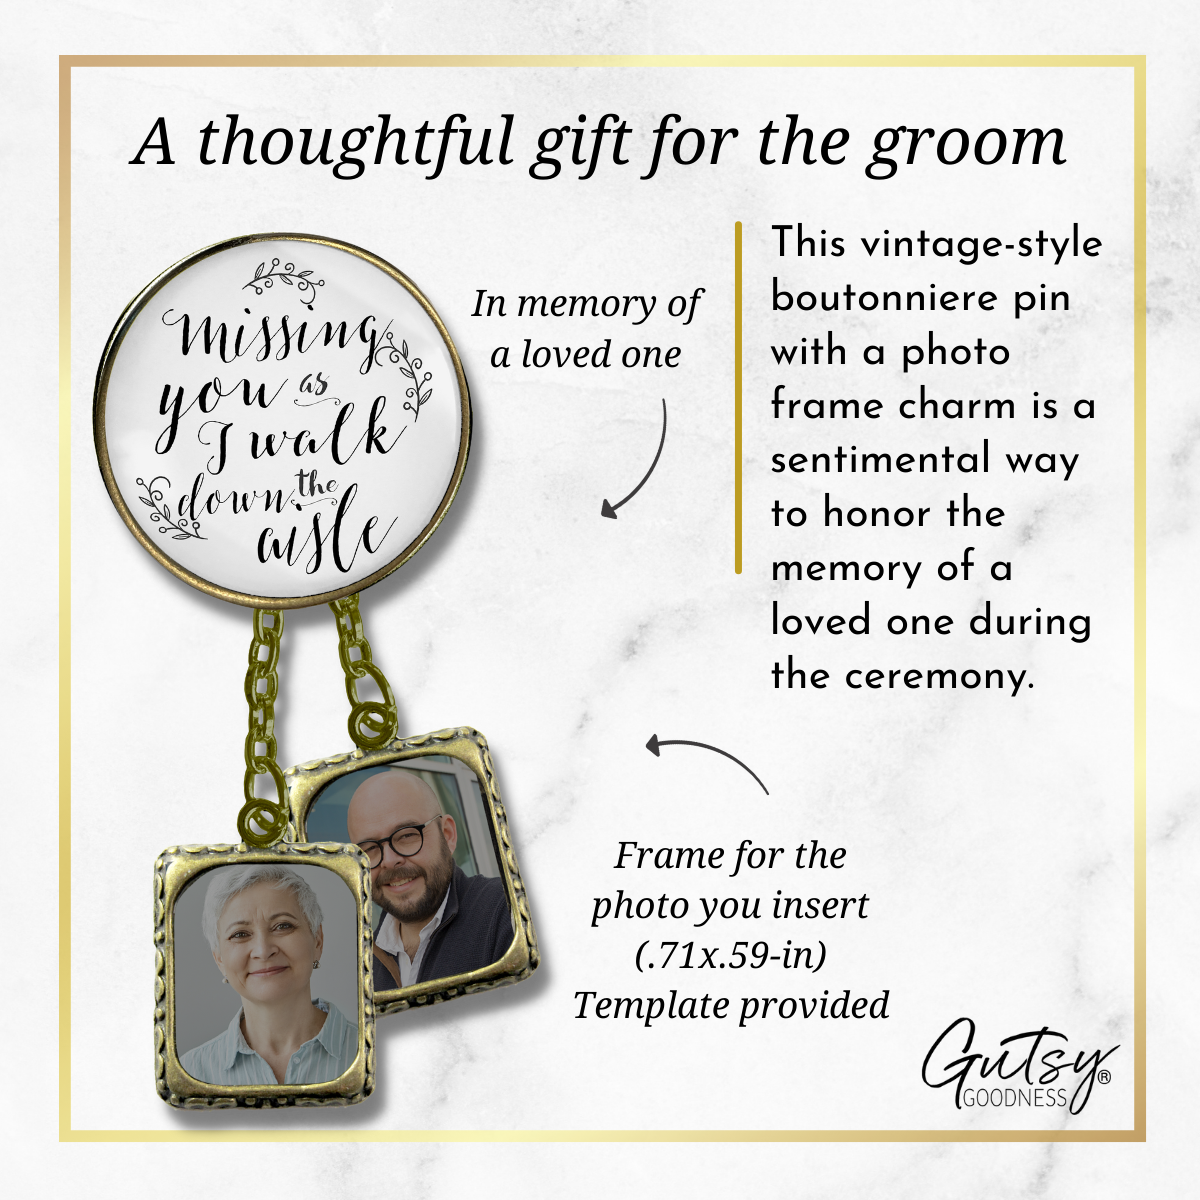 Wedding Memorial Boutonniere Pin Photo Frame Missing You Today Vintage White For Men 2 Frames - Gutsy Goodness